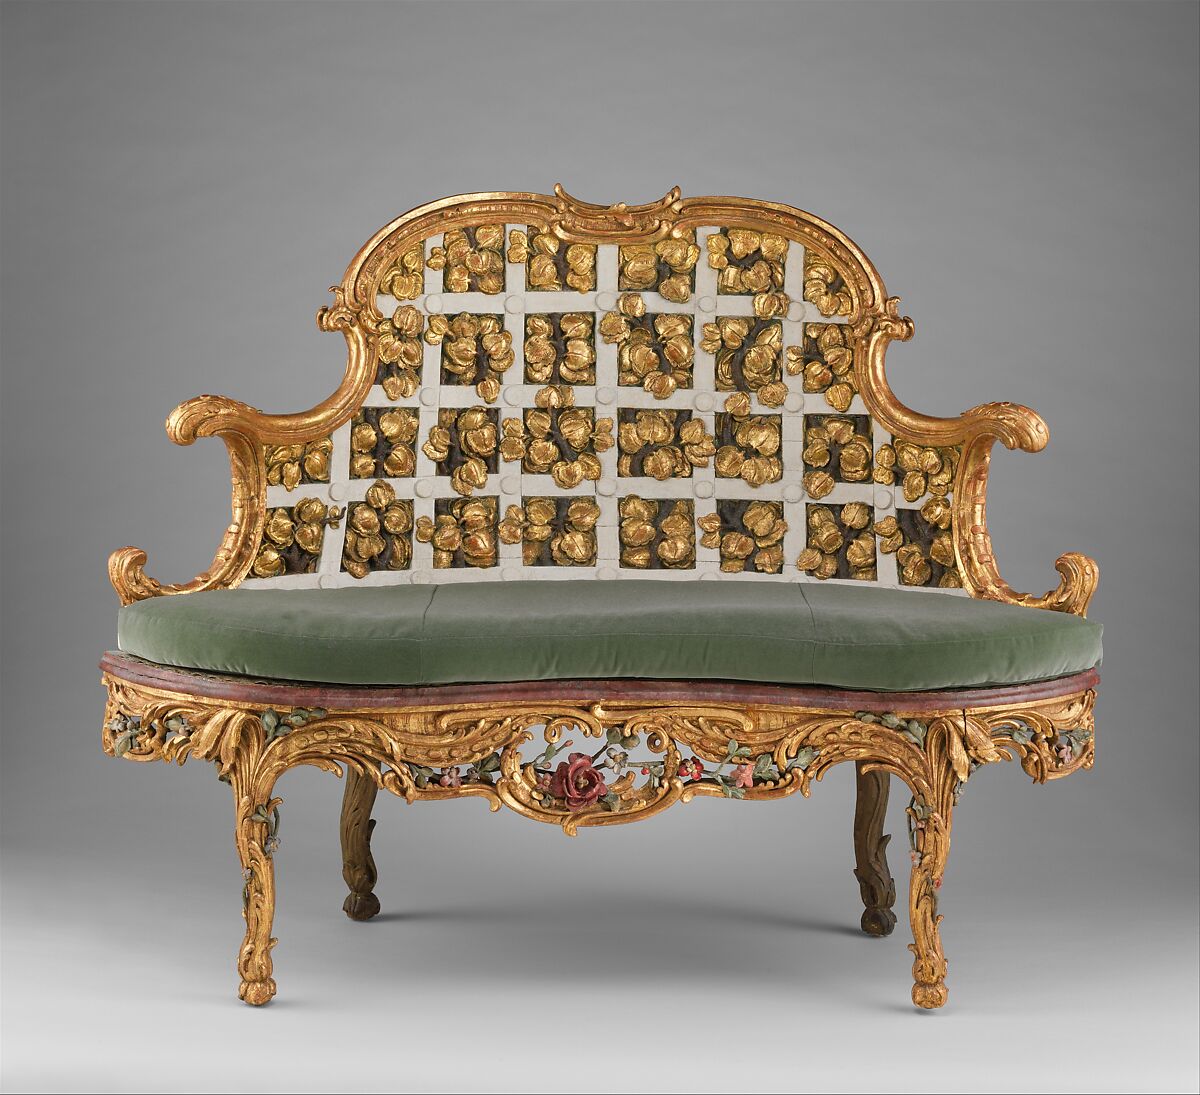 Settee (one of a pair) (part of a set), Attributed to Johann Michael Bauer (German, Westheim 1710–1779 Bamberg), Carved, painted and gilded linden wood; squab pillow in silk velvet (not original), German, Würzberg 